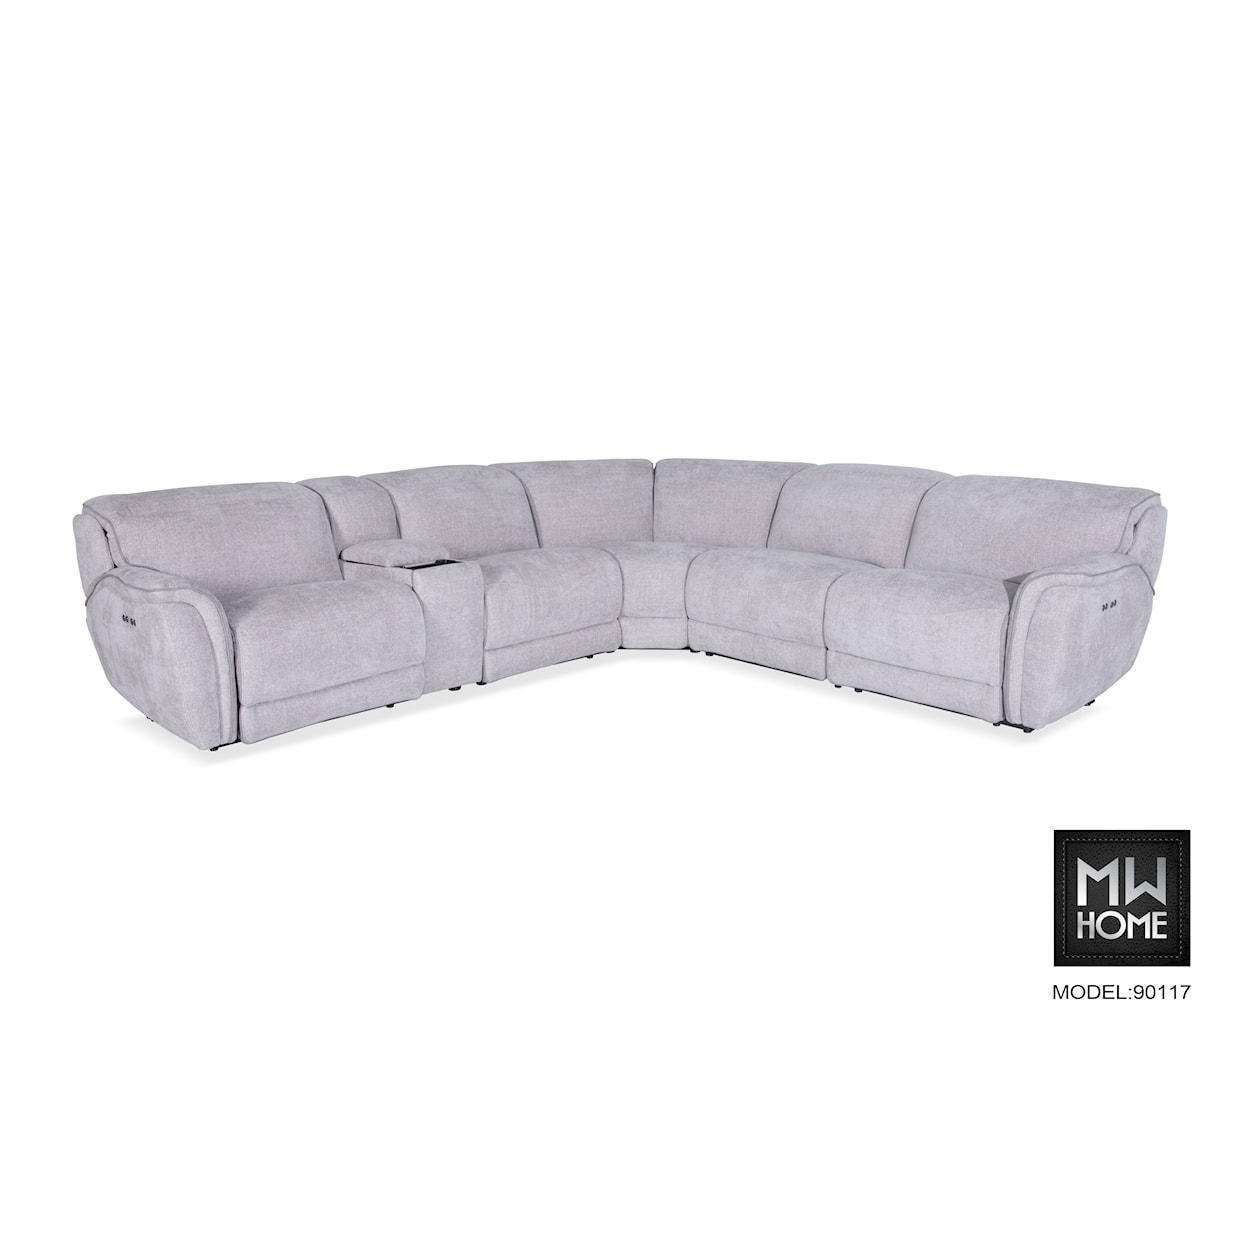 MW Home 90117 4-Seat Power Reclining Sectional Sofa